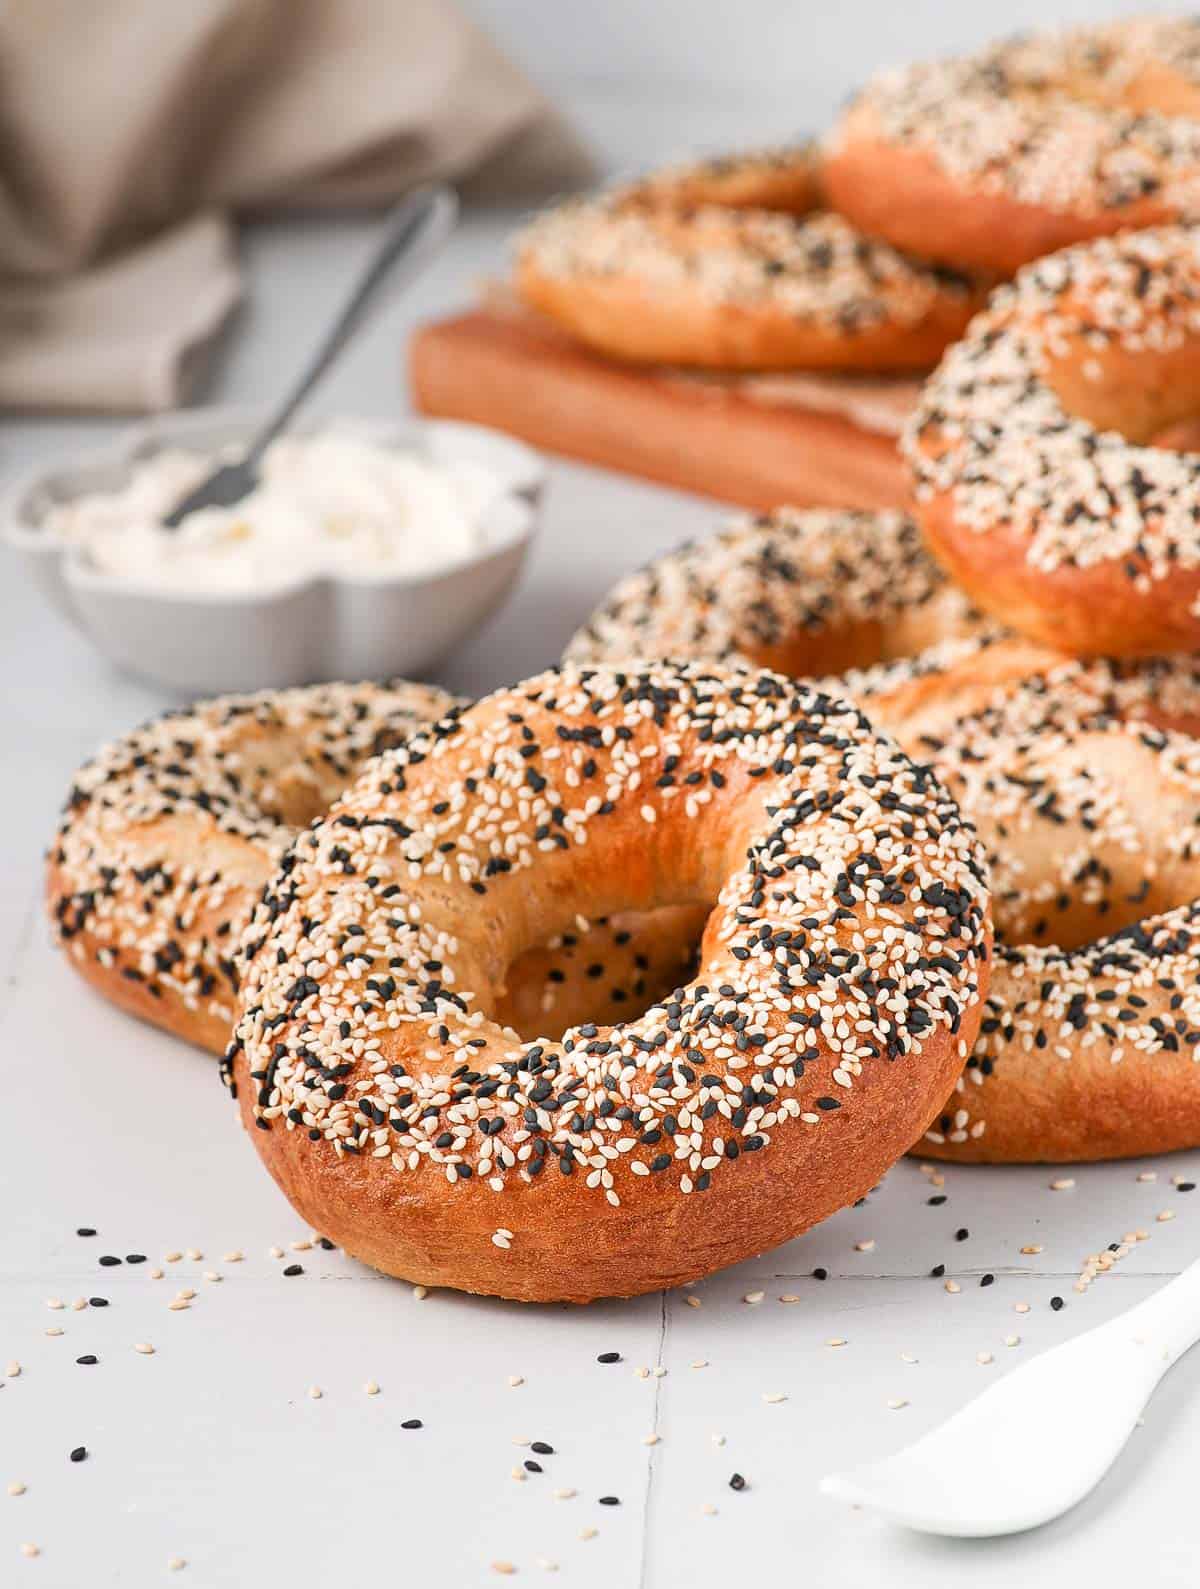 Bagels stacked on a white tiled surface.